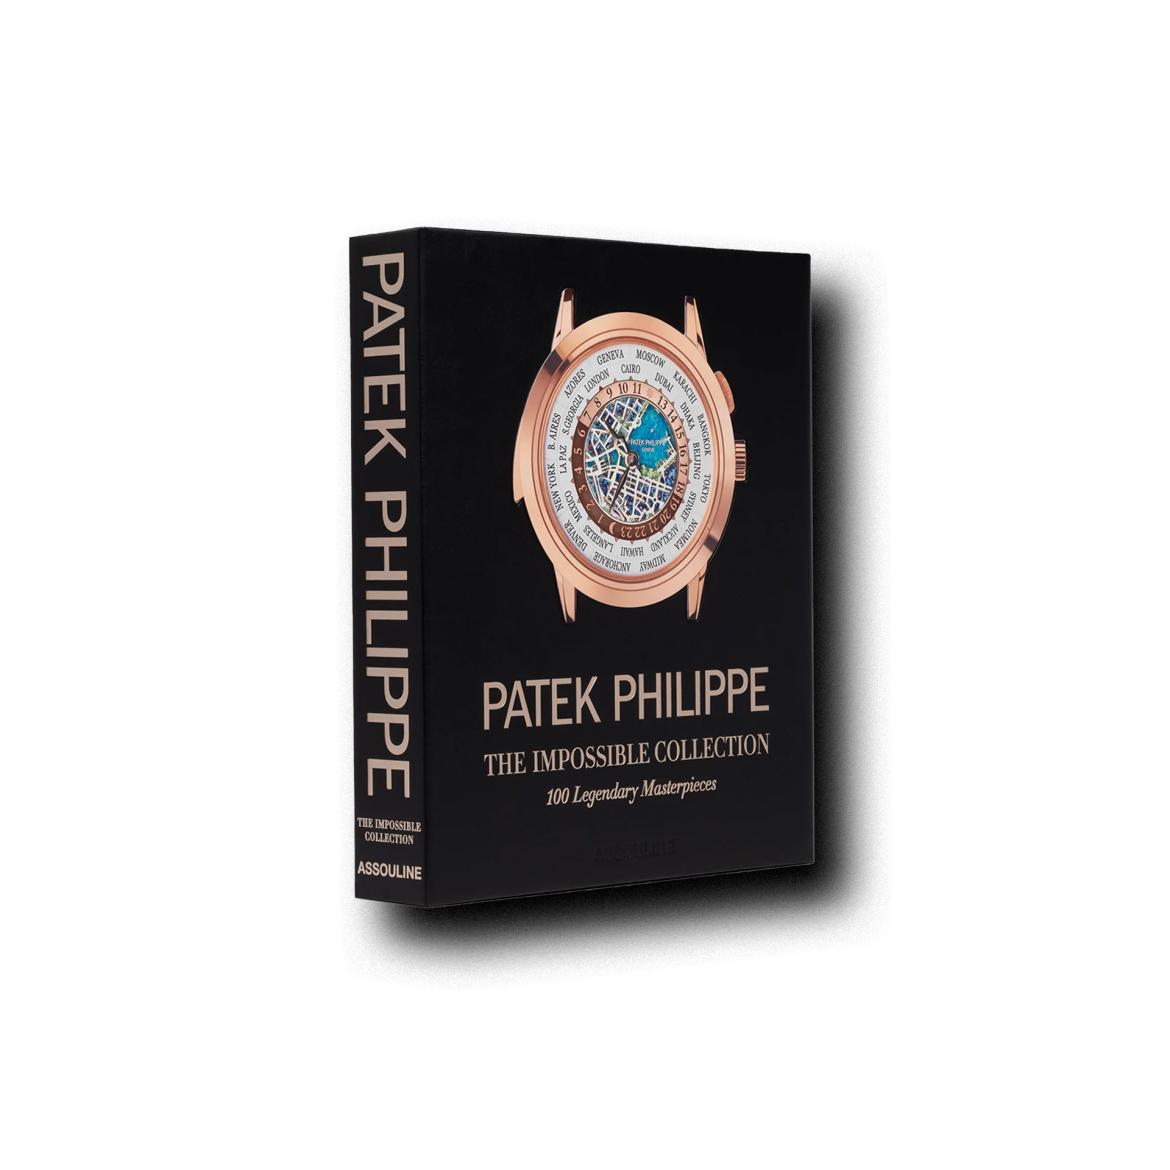 Patek Philippe - The Impossible Collection book ISBN 978-16-498024-0-8